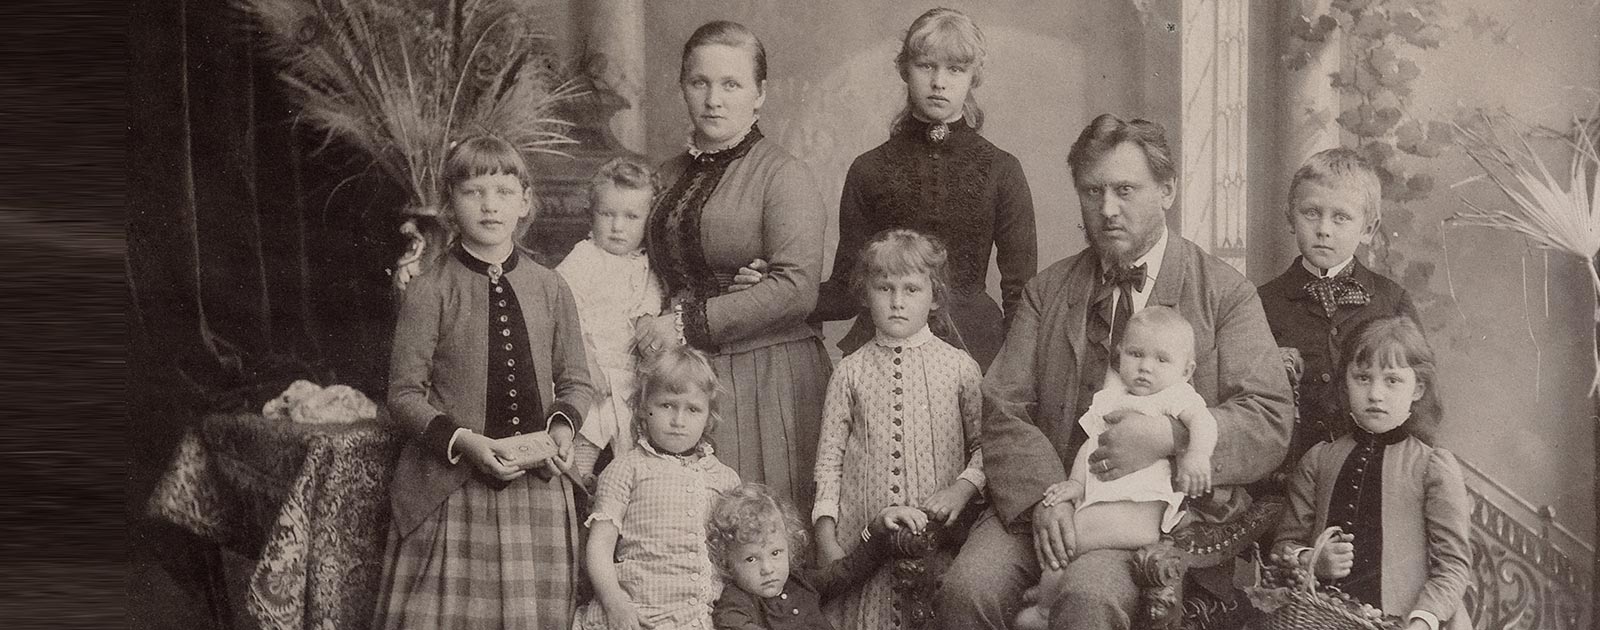 Johanna Settari, the great-grandmother of the current owner of Hotel Briol with her family in a black and white photograph